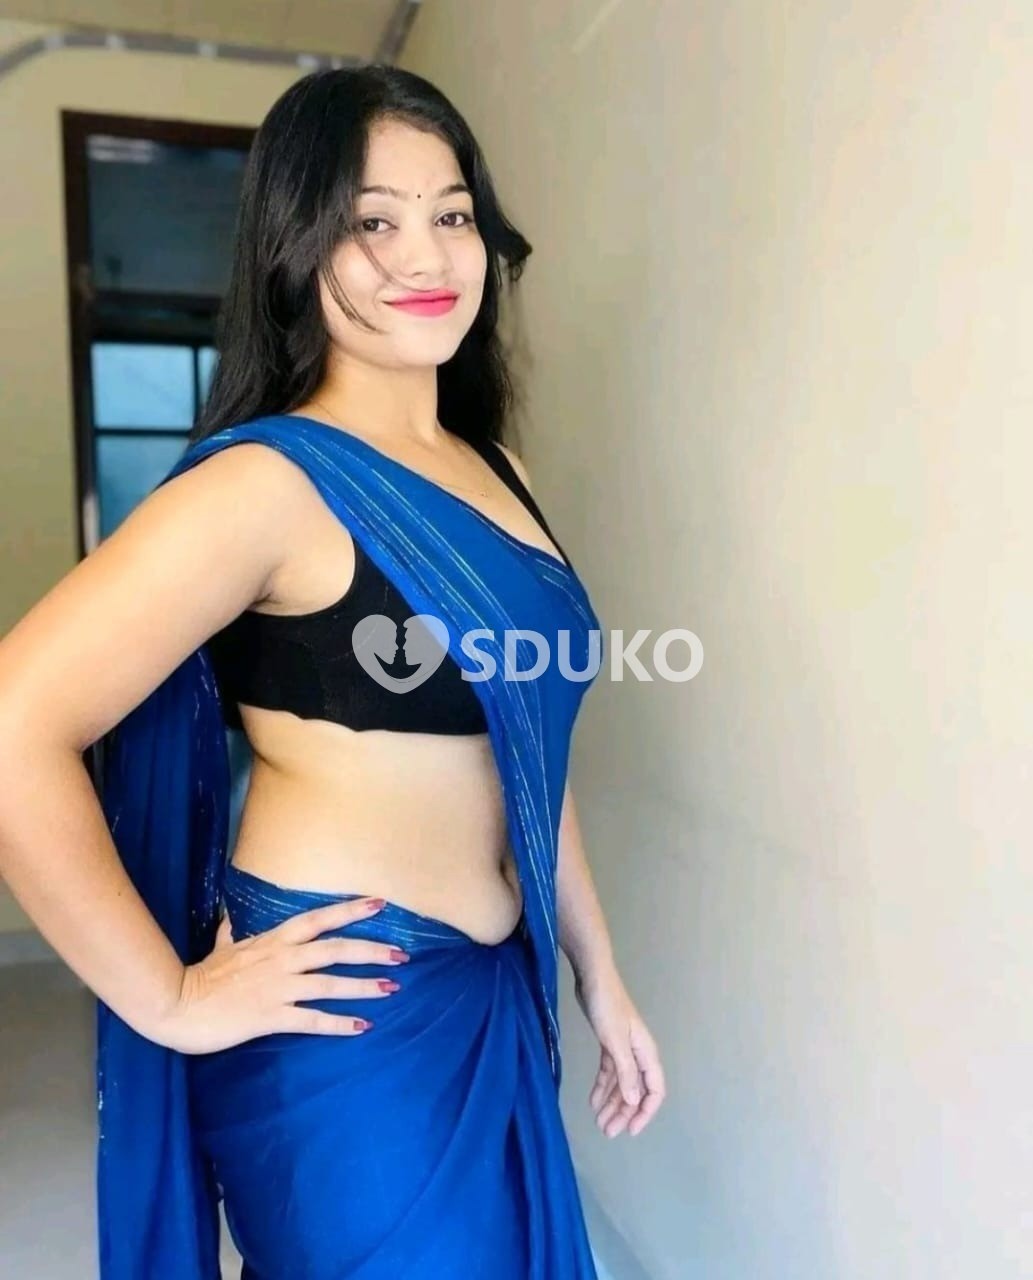 BORIVALI ❣️ MY SELF ABHILASHA UNLIMITED SEX CUTE BEST SERVICE AND SAFE AND SECURE AND 24 HR AVAILABLE